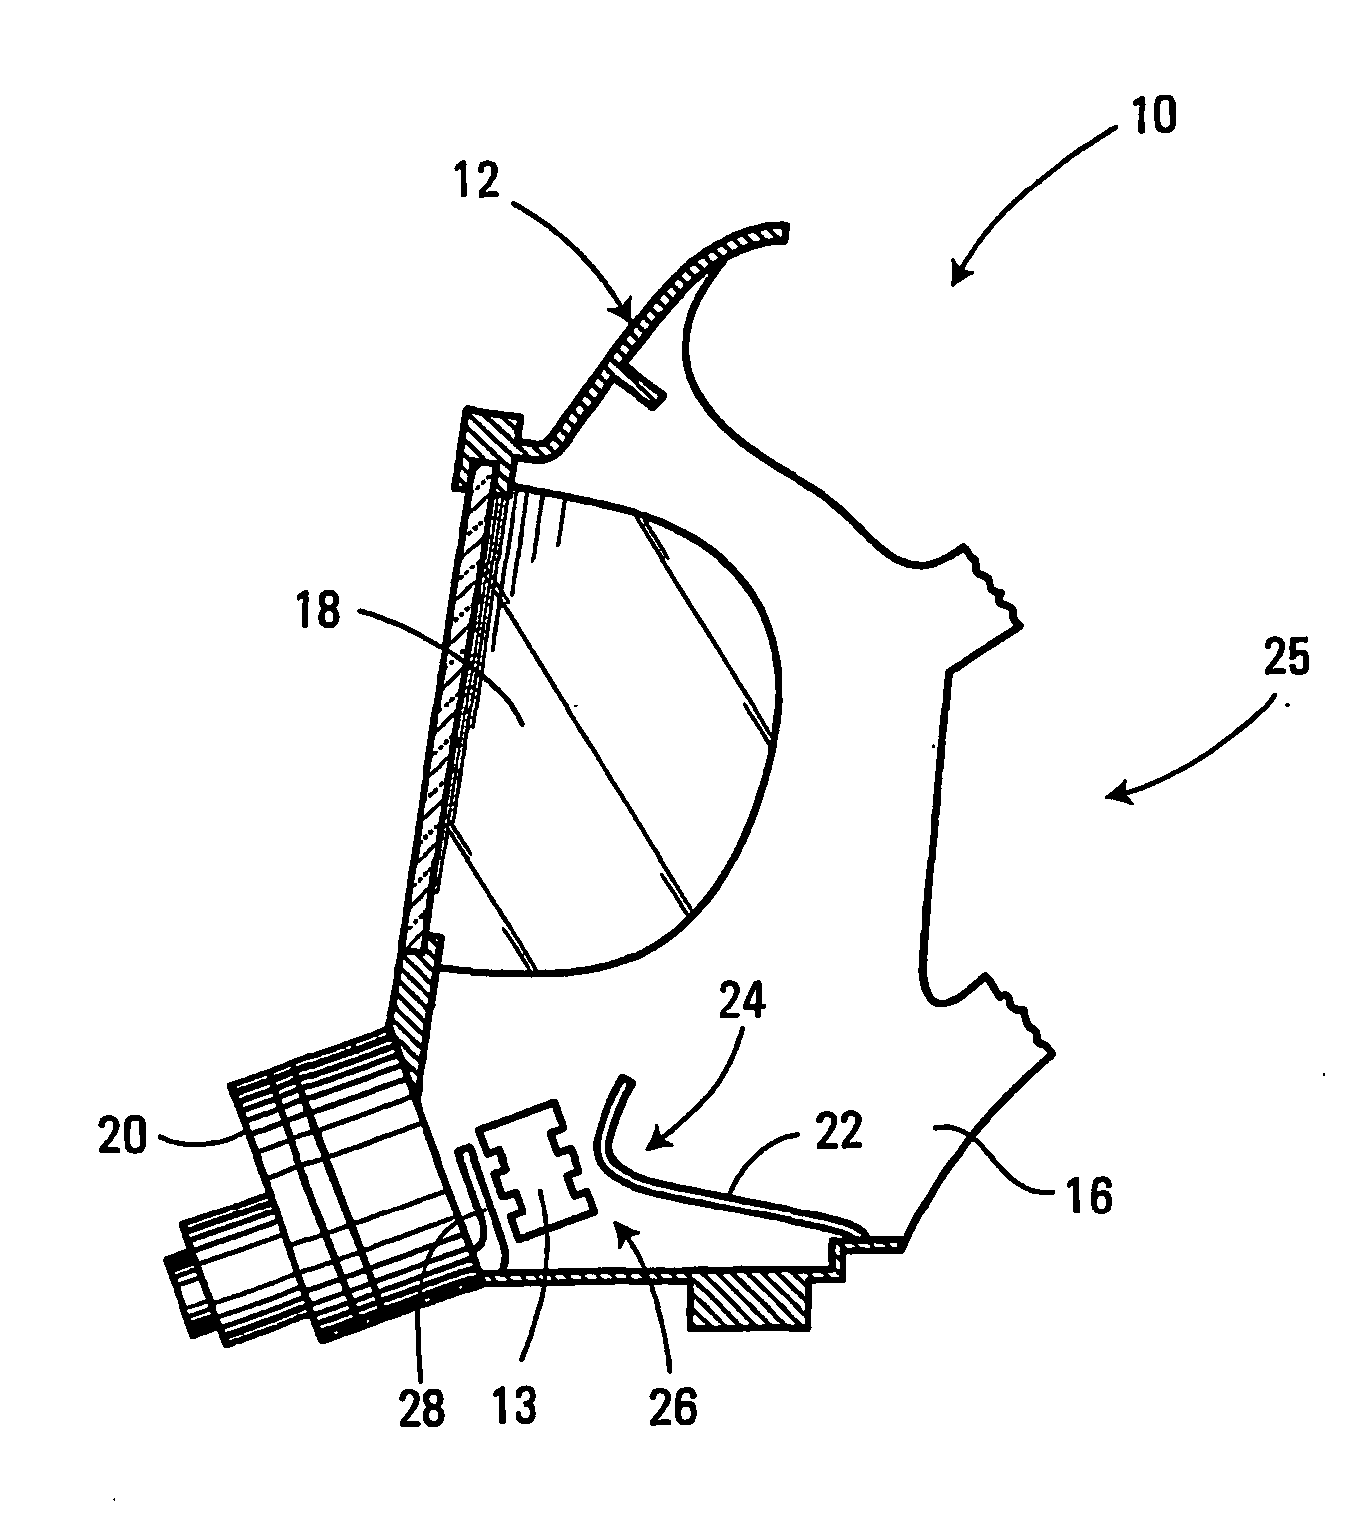 Communication apparatus, method and system for a self-contained breathing apparatus